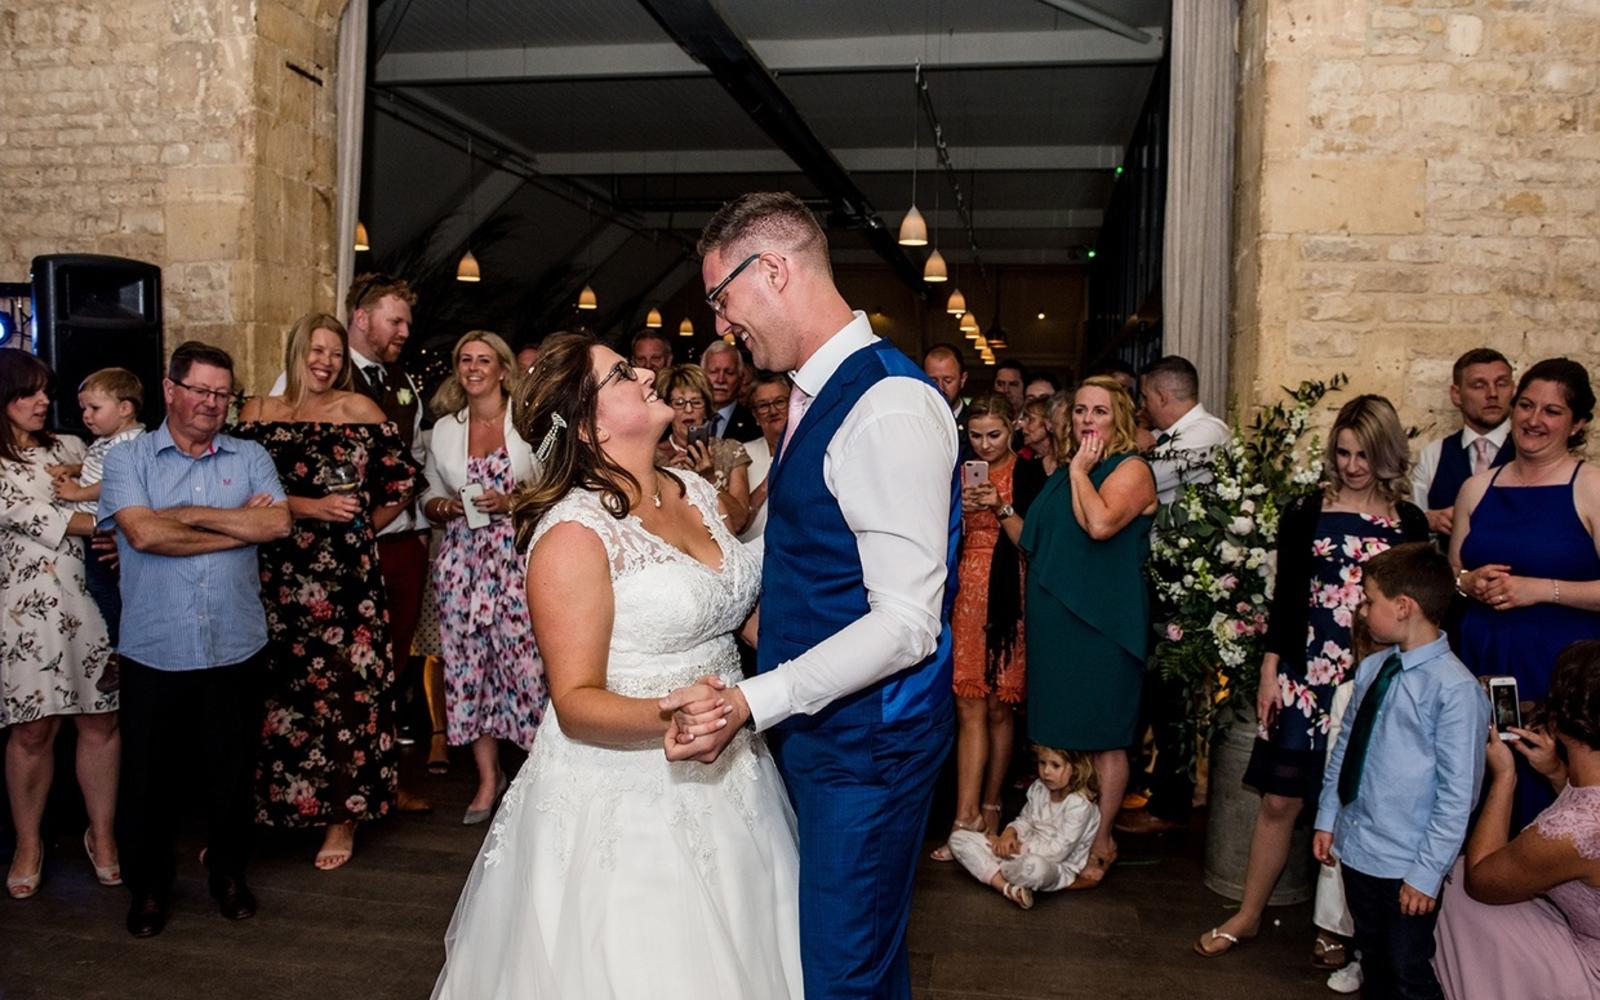 Capture Every Moment wedding photography duo from Cirencester reportage and traditional photographers Lapstone Barn Chipping Campden Cotswolds venue first day evening reception 